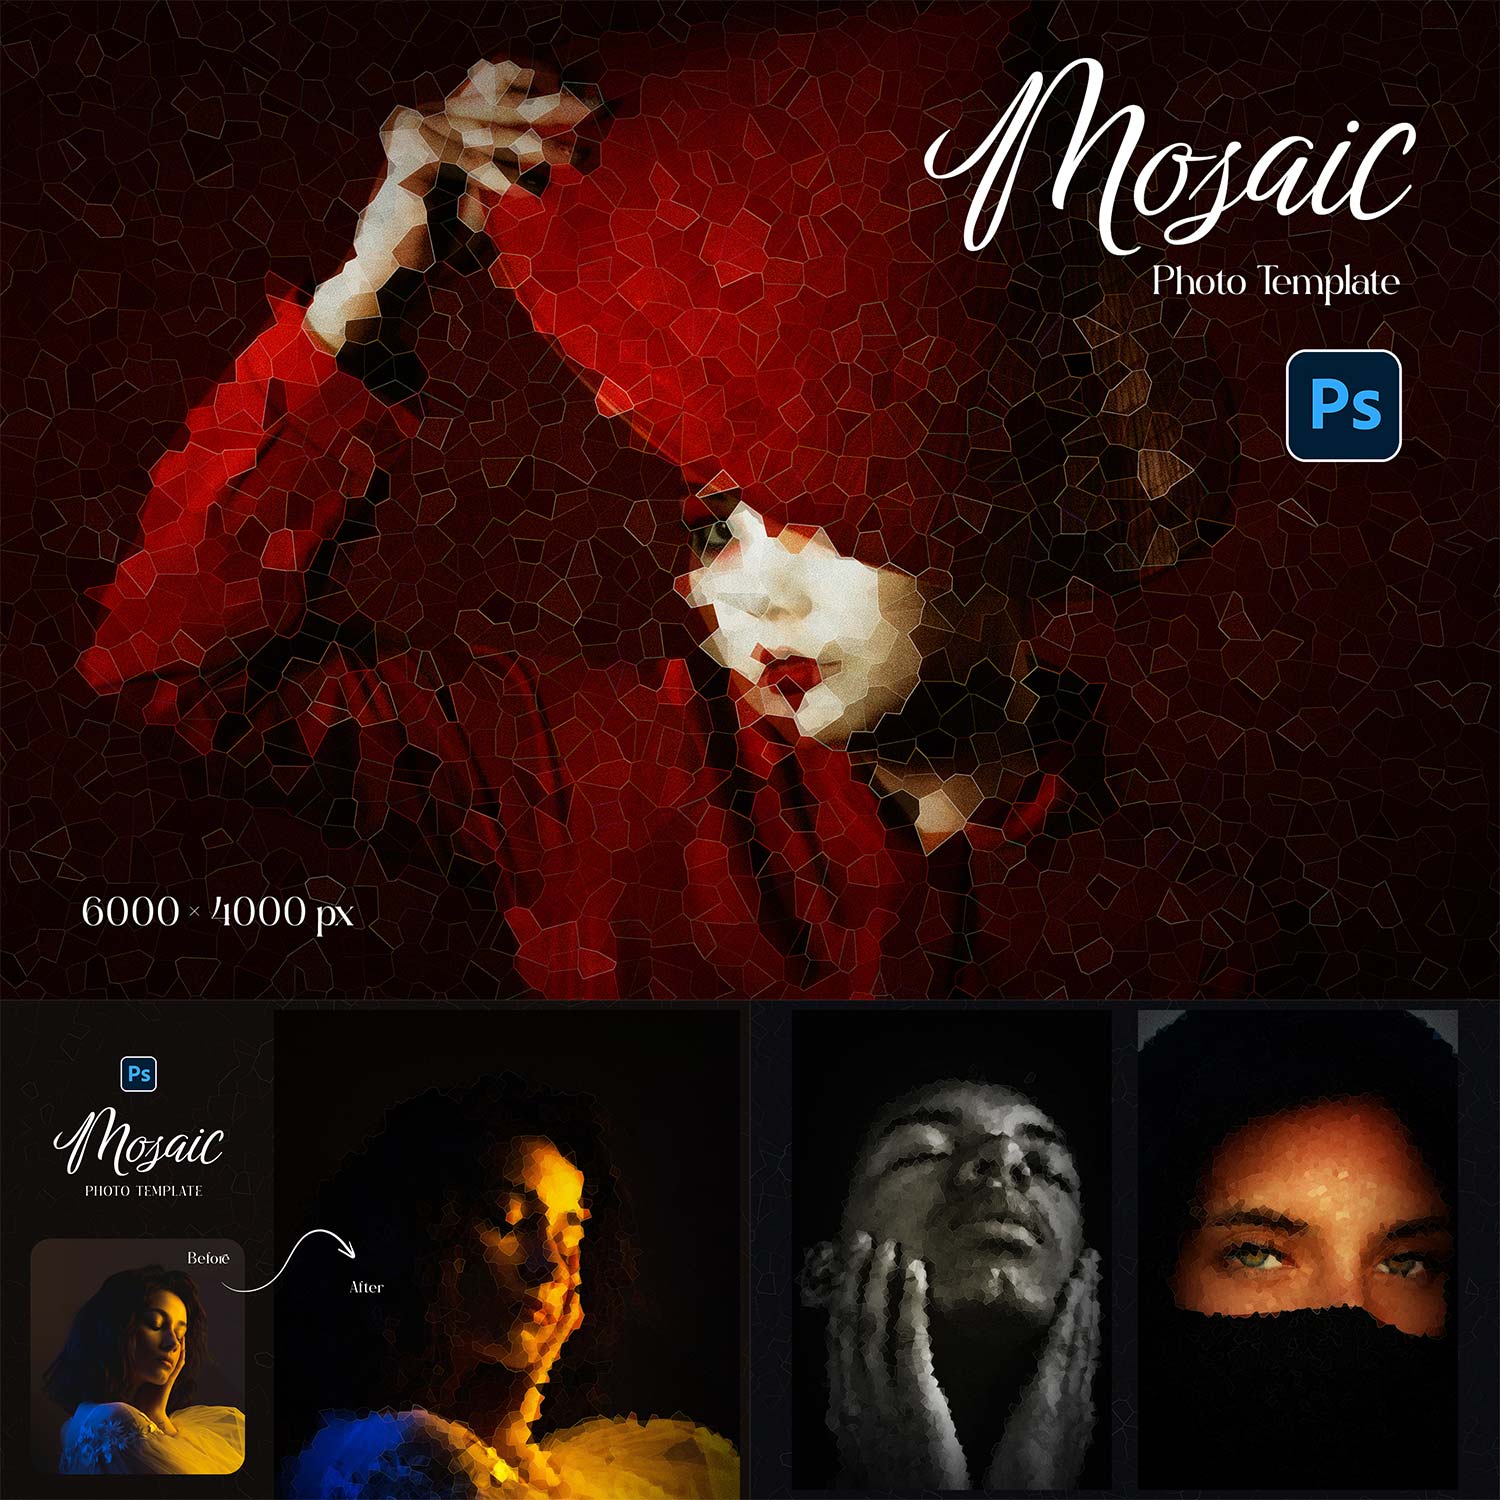 Mosaic Photo Template preview image.